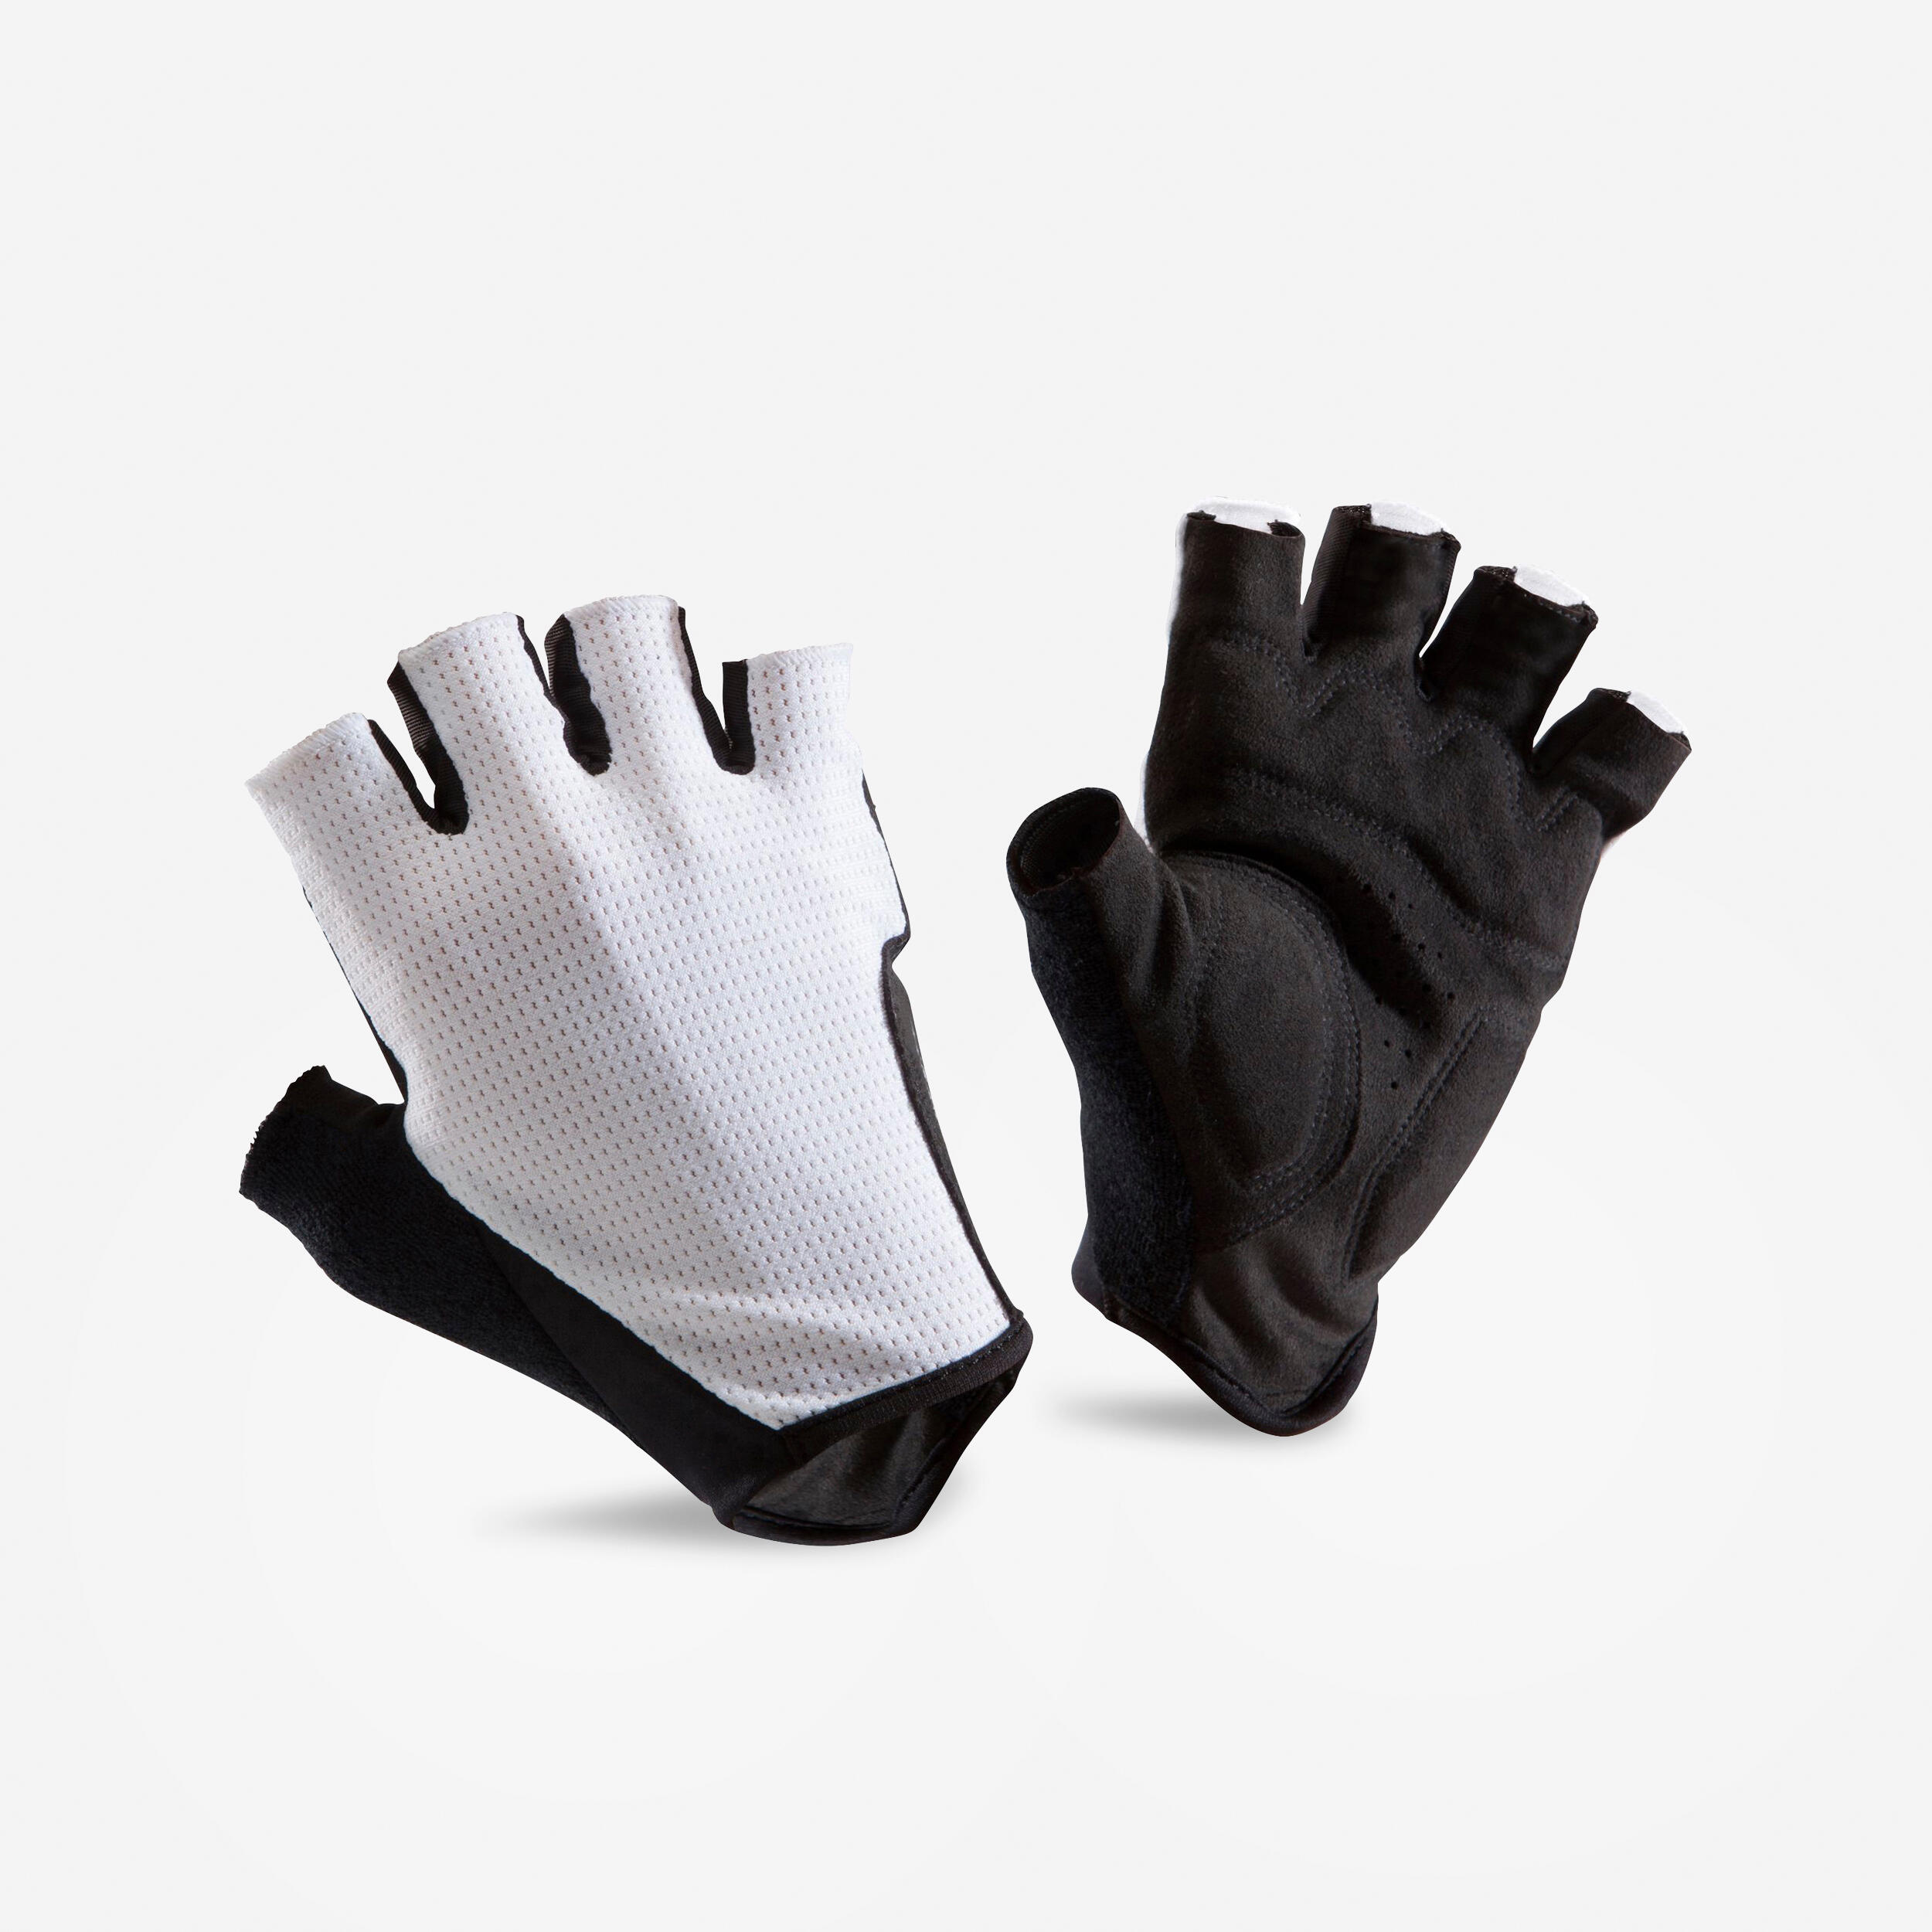 Road Cycling Gloves 500 - White 1/5